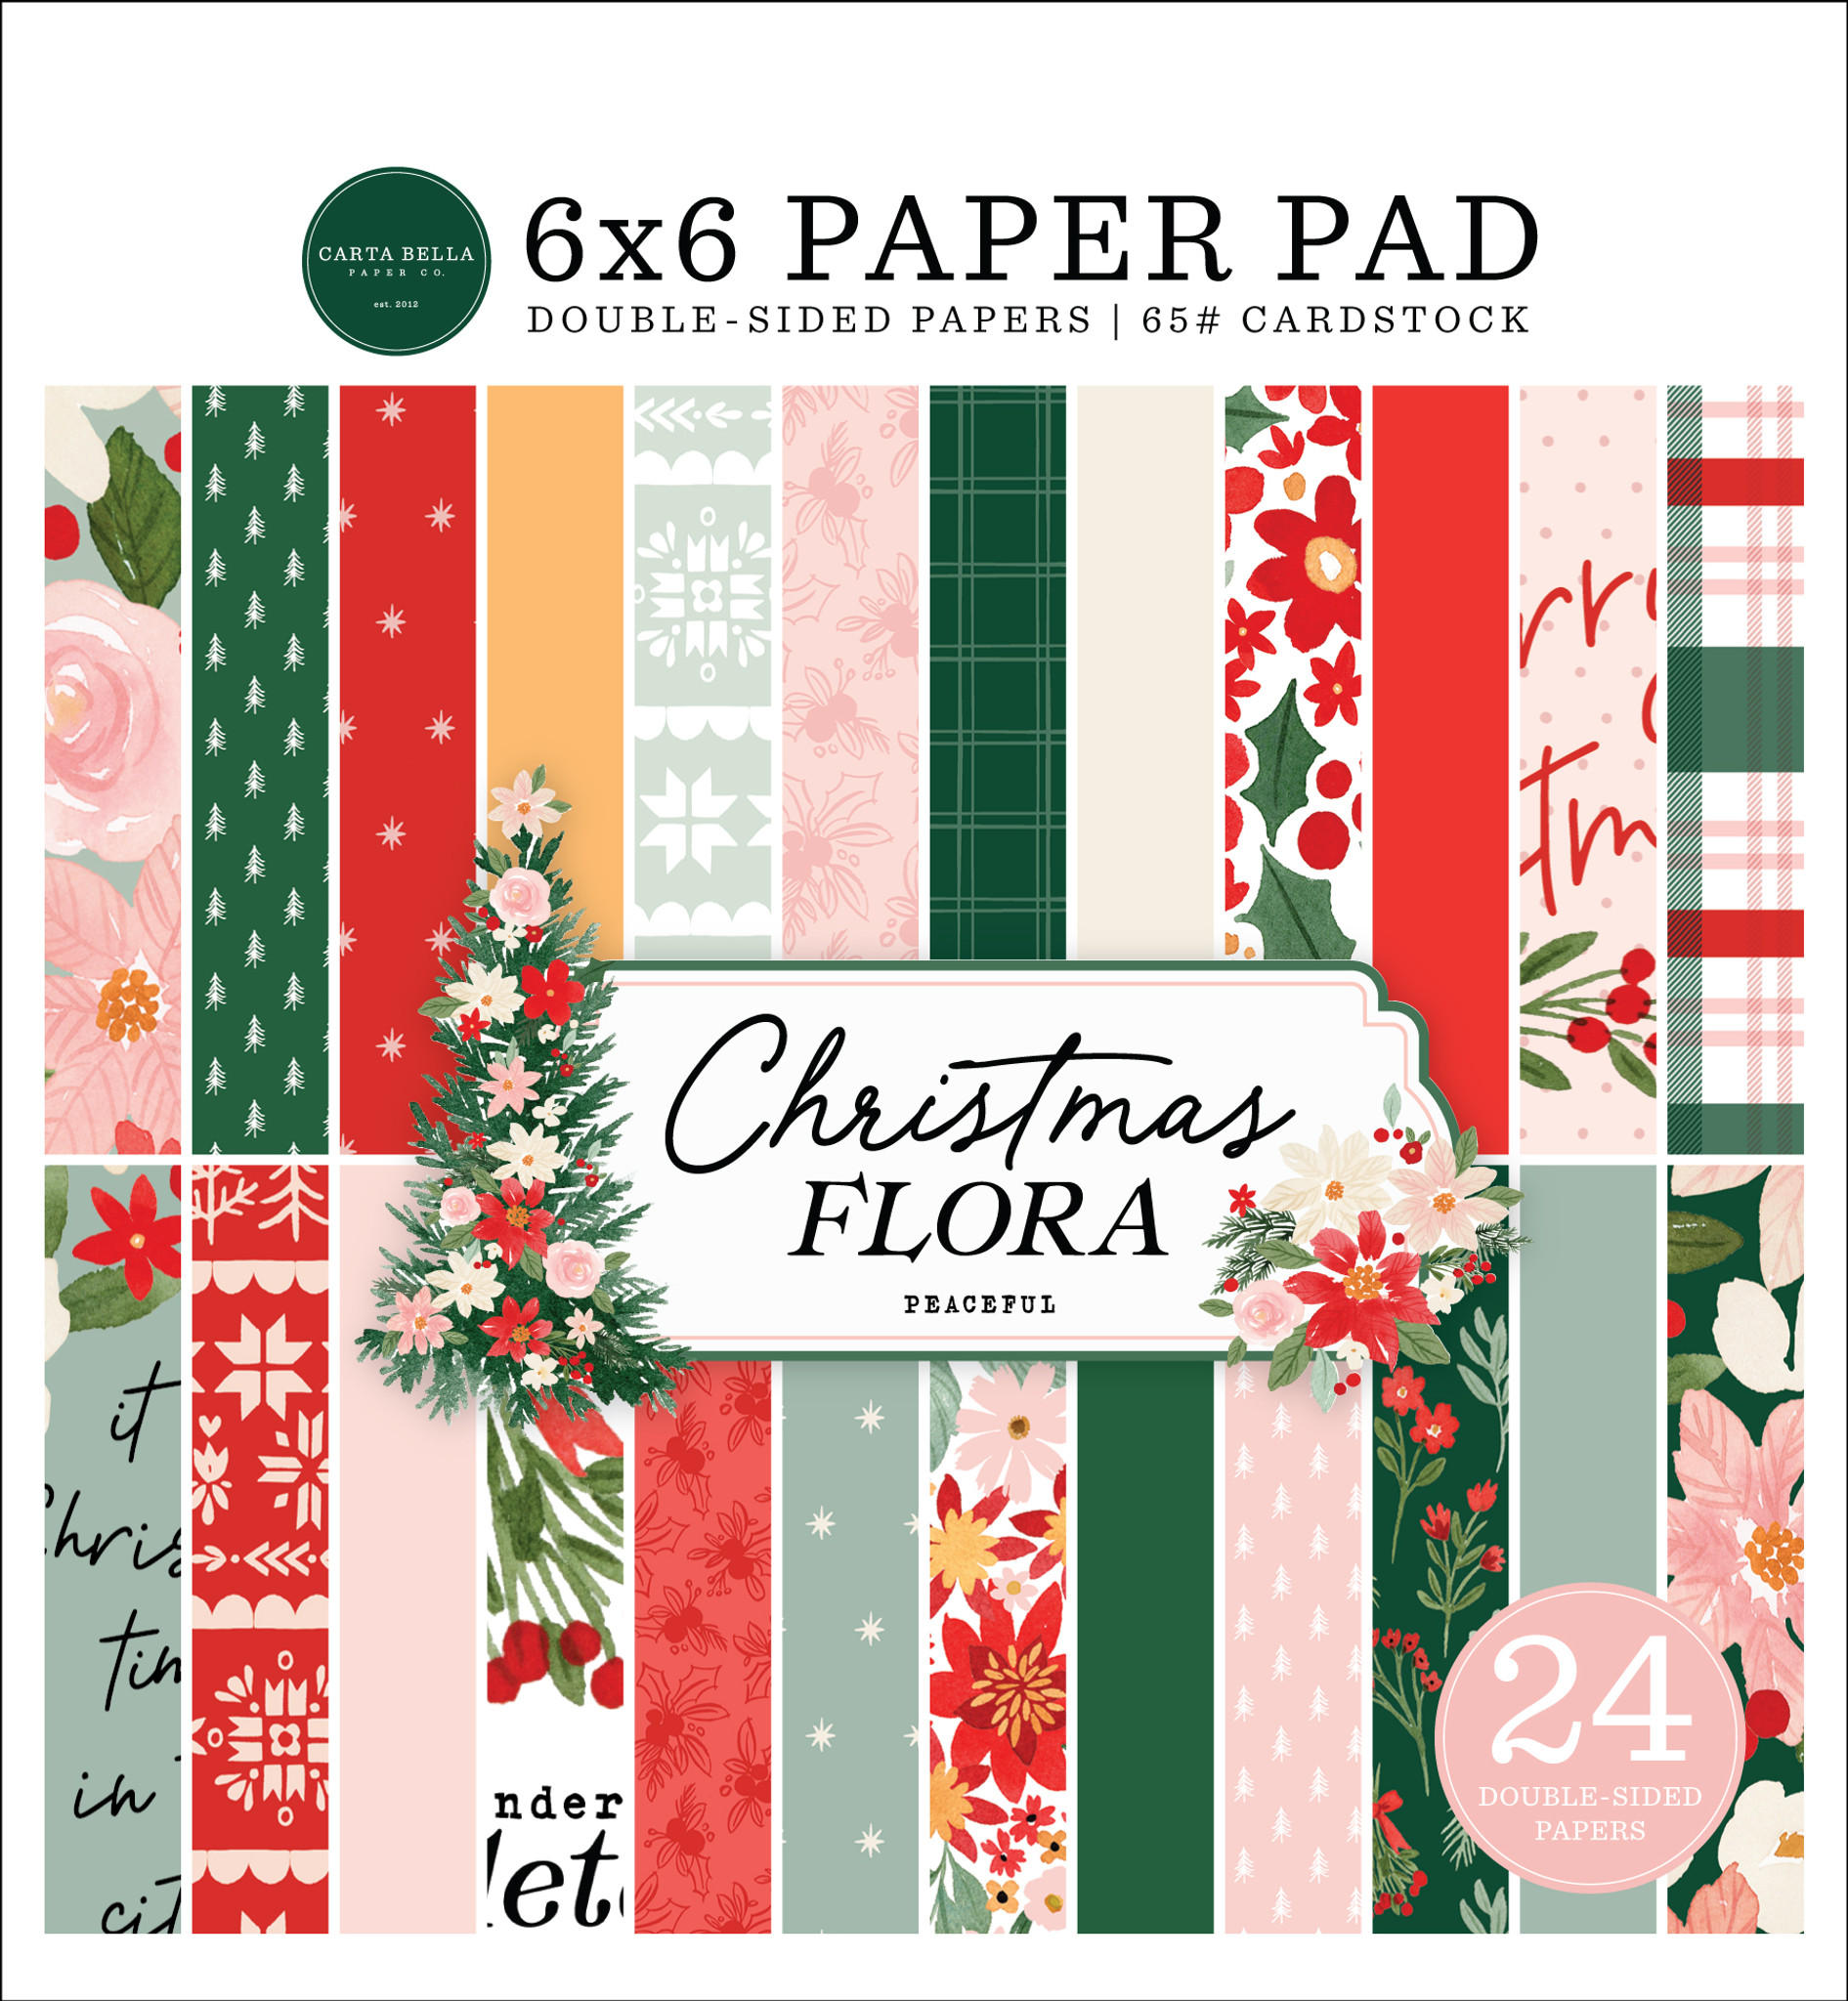 Peaceful Christmas Flora 6x6 Paper Pad